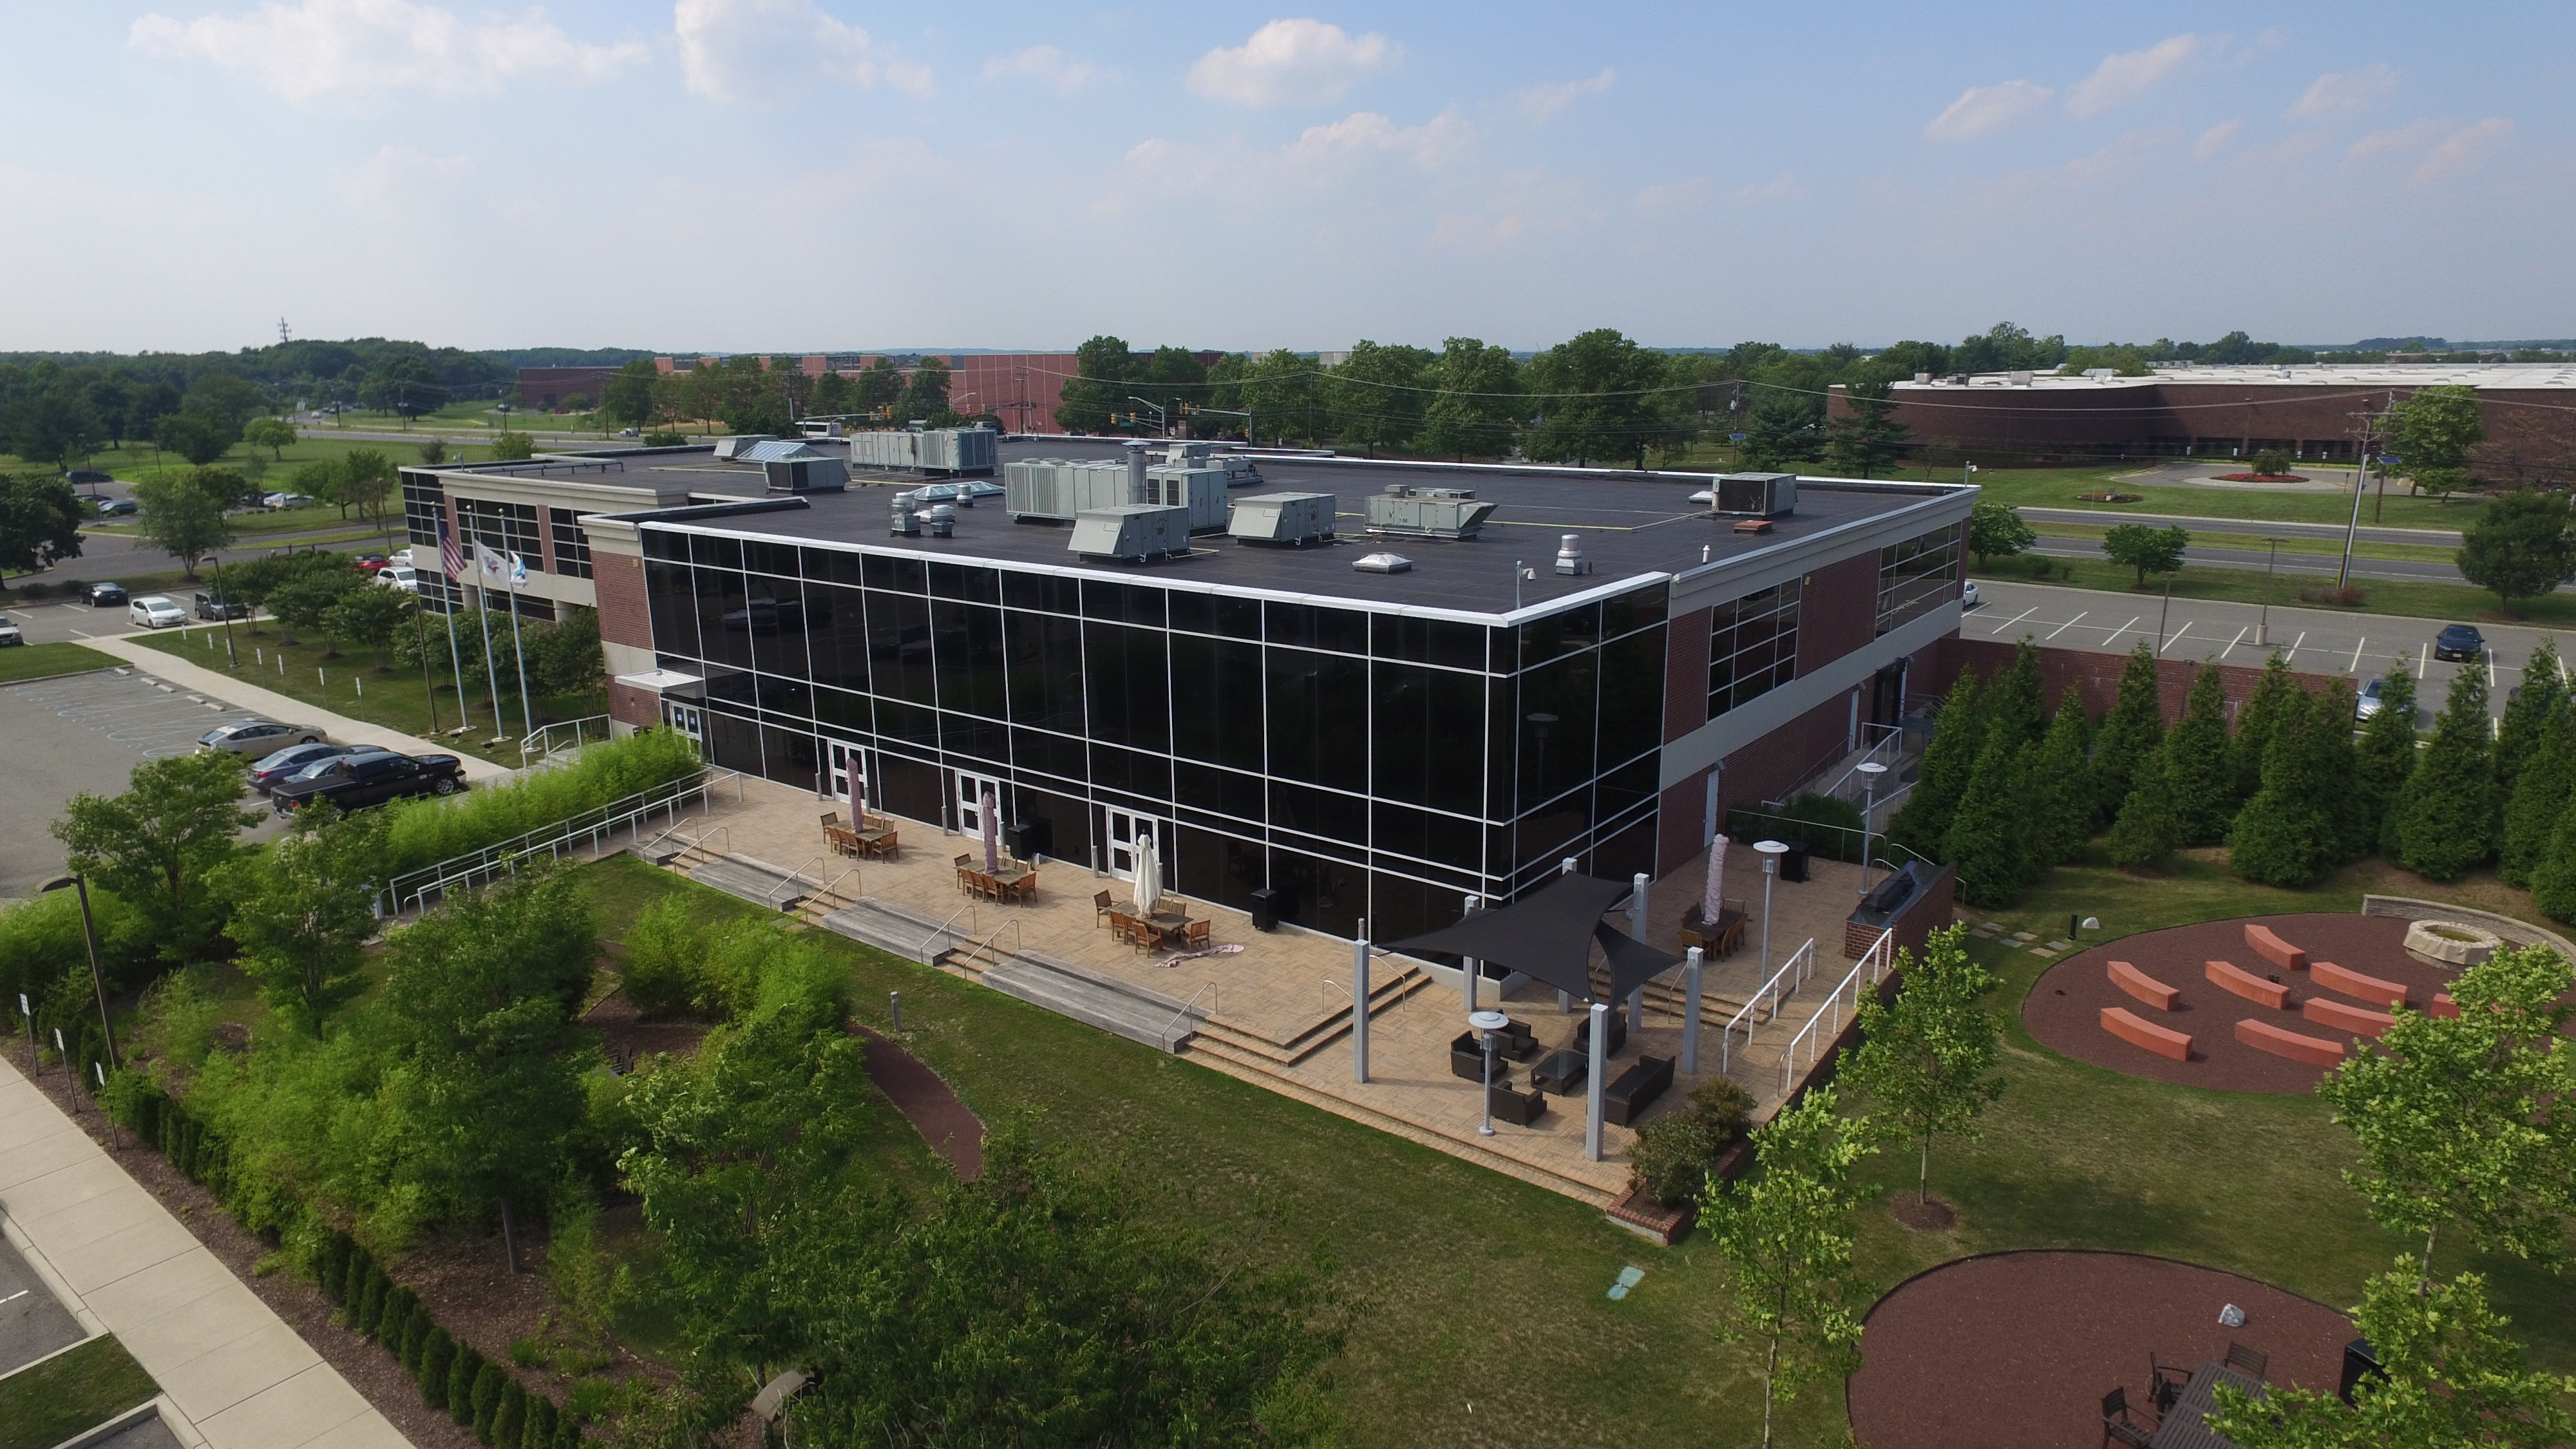 Infragistics' Innovation Lab is located in the company’s 74,000 square-foot New Jersey headquarters. The Lab is part of Infragistics’ $22M investment in converting a vacant, two-story warehouse into an open work environment. 